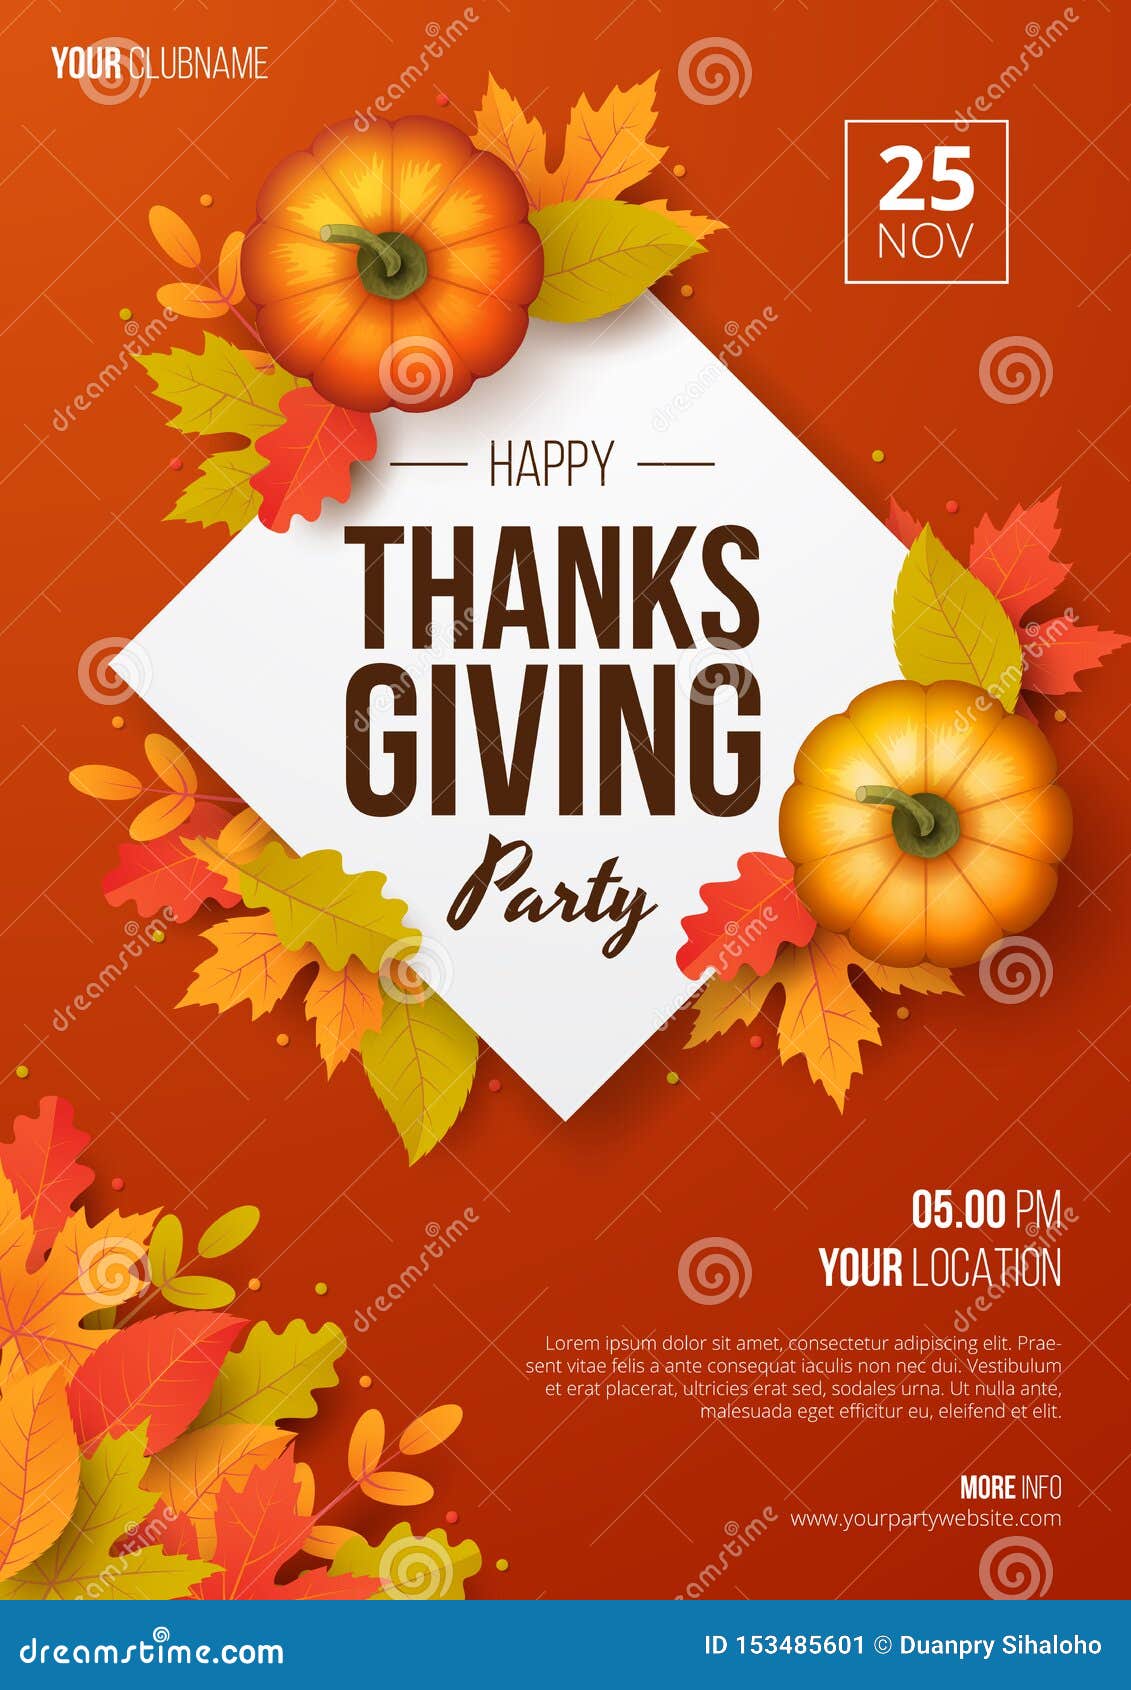 21 Thanksgiving Party Flyer Photos - Free & Royalty-Free Stock Pertaining To Thanksgiving Flyer Template Free